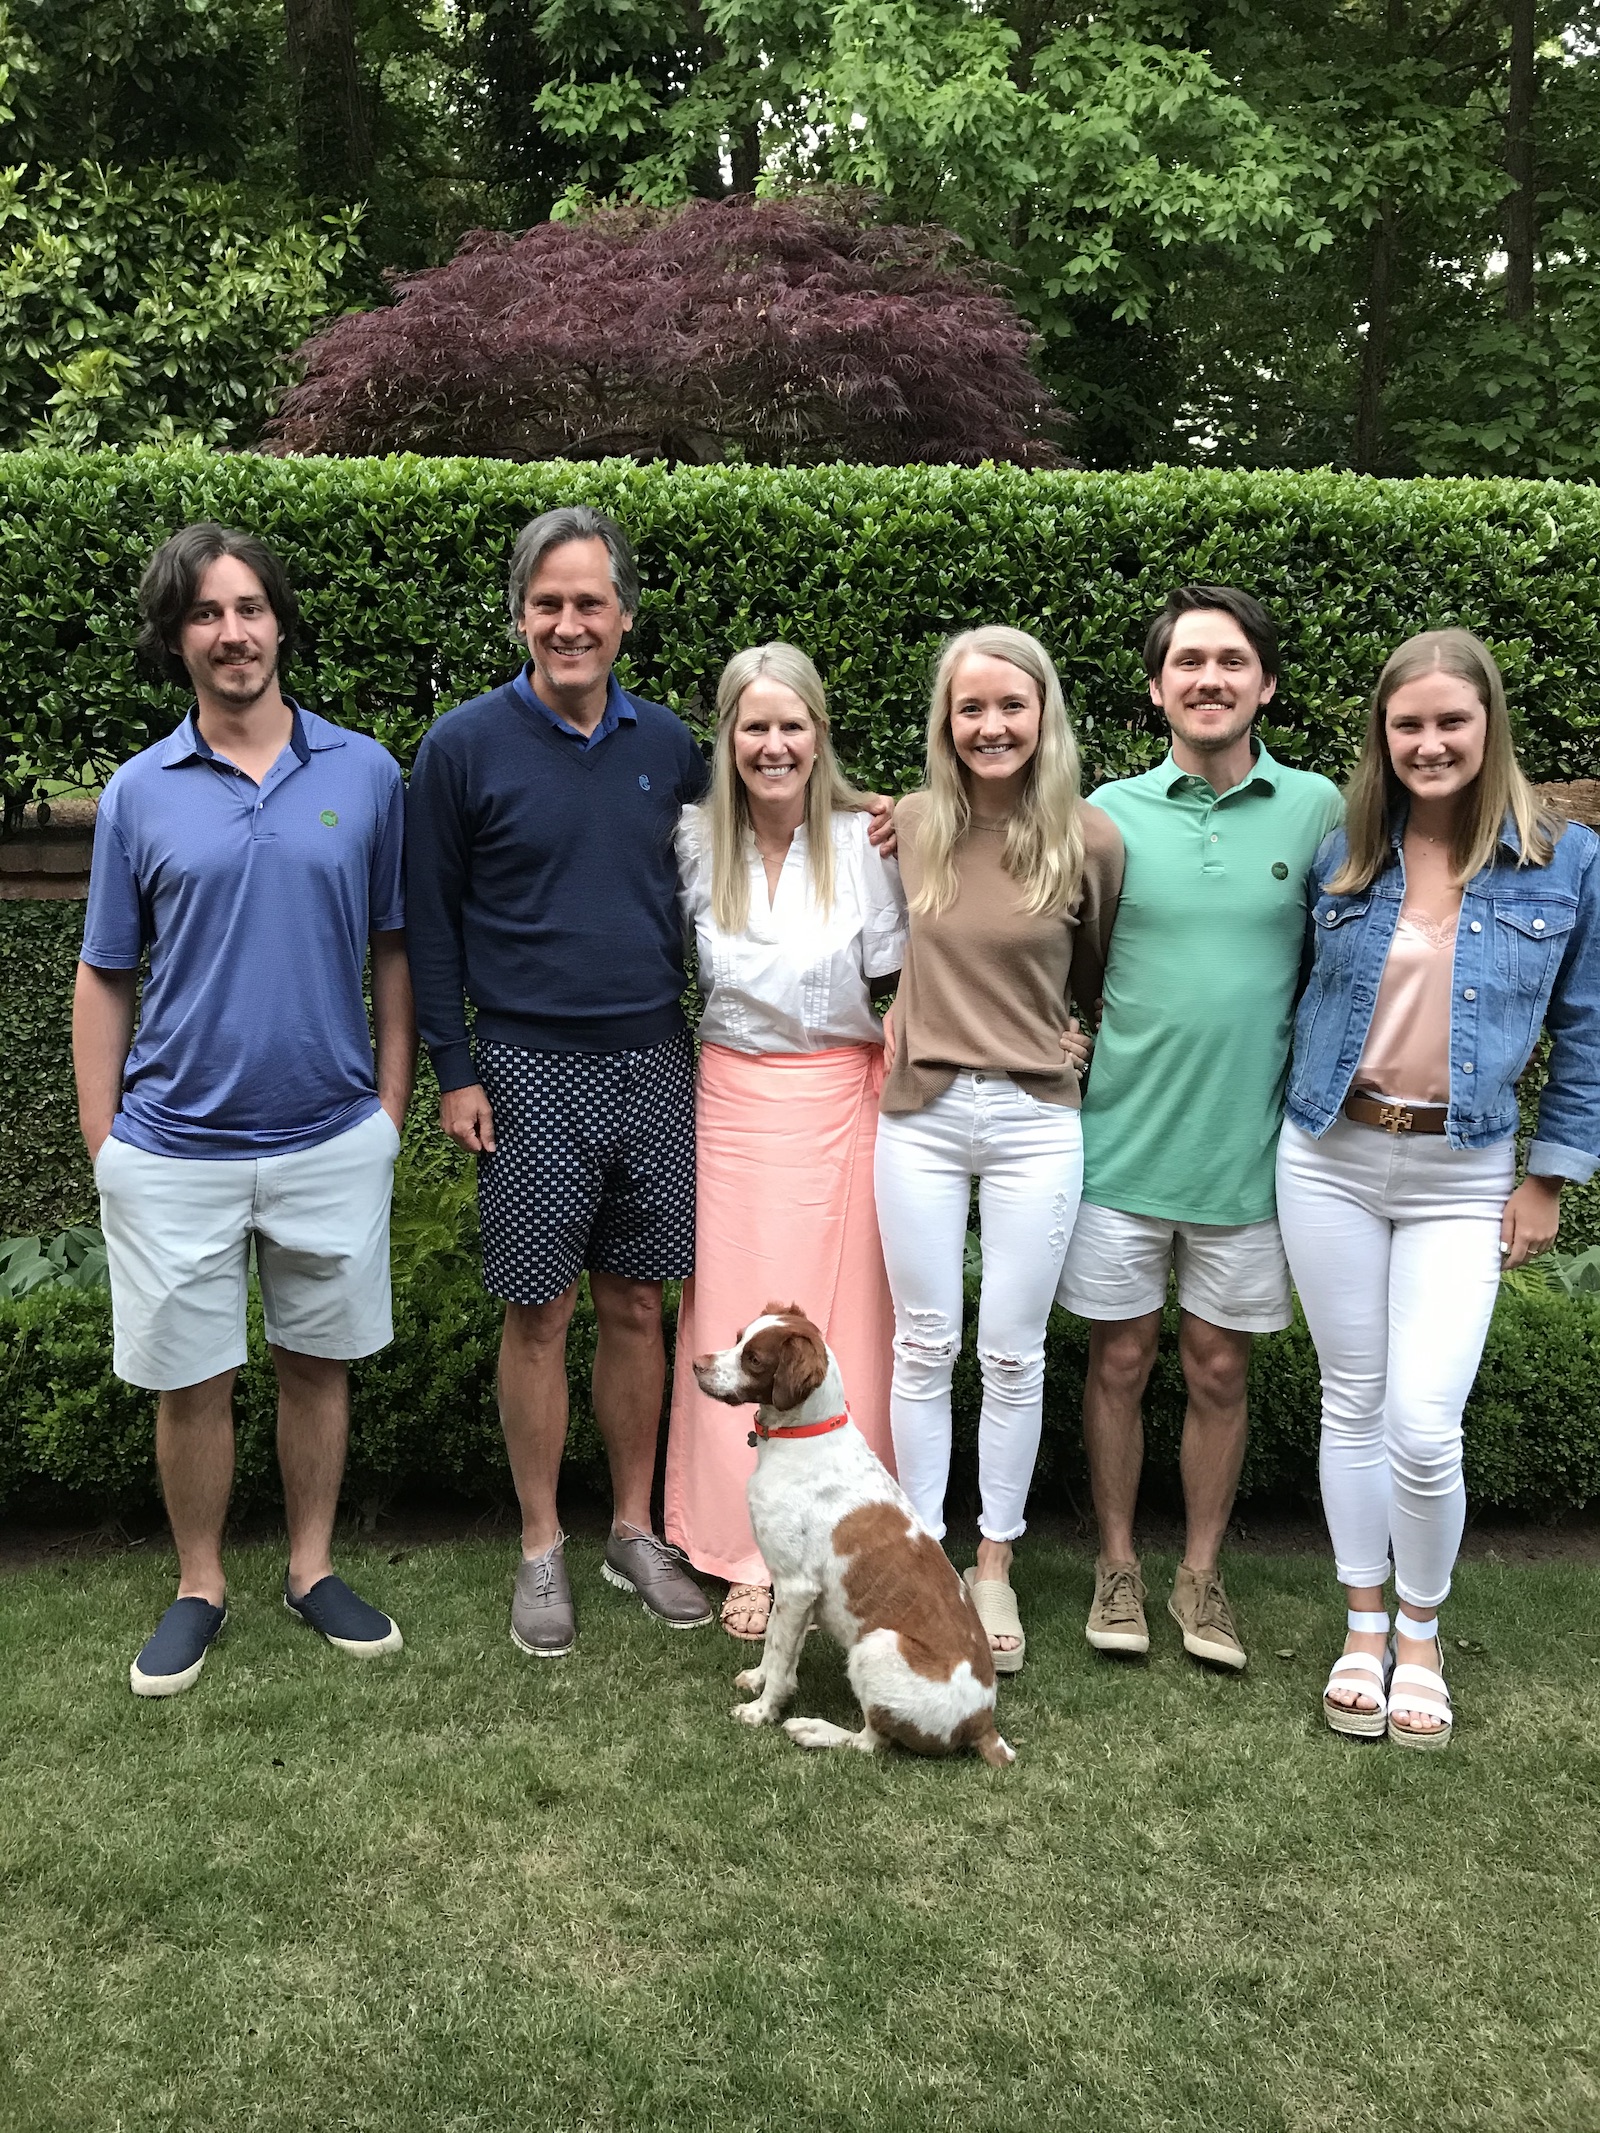 Margaret O'Neal is pictured with her family. Joining her to celebrate Commencement will be her parents, grandmother, two older brothers, and her sister-in-law.